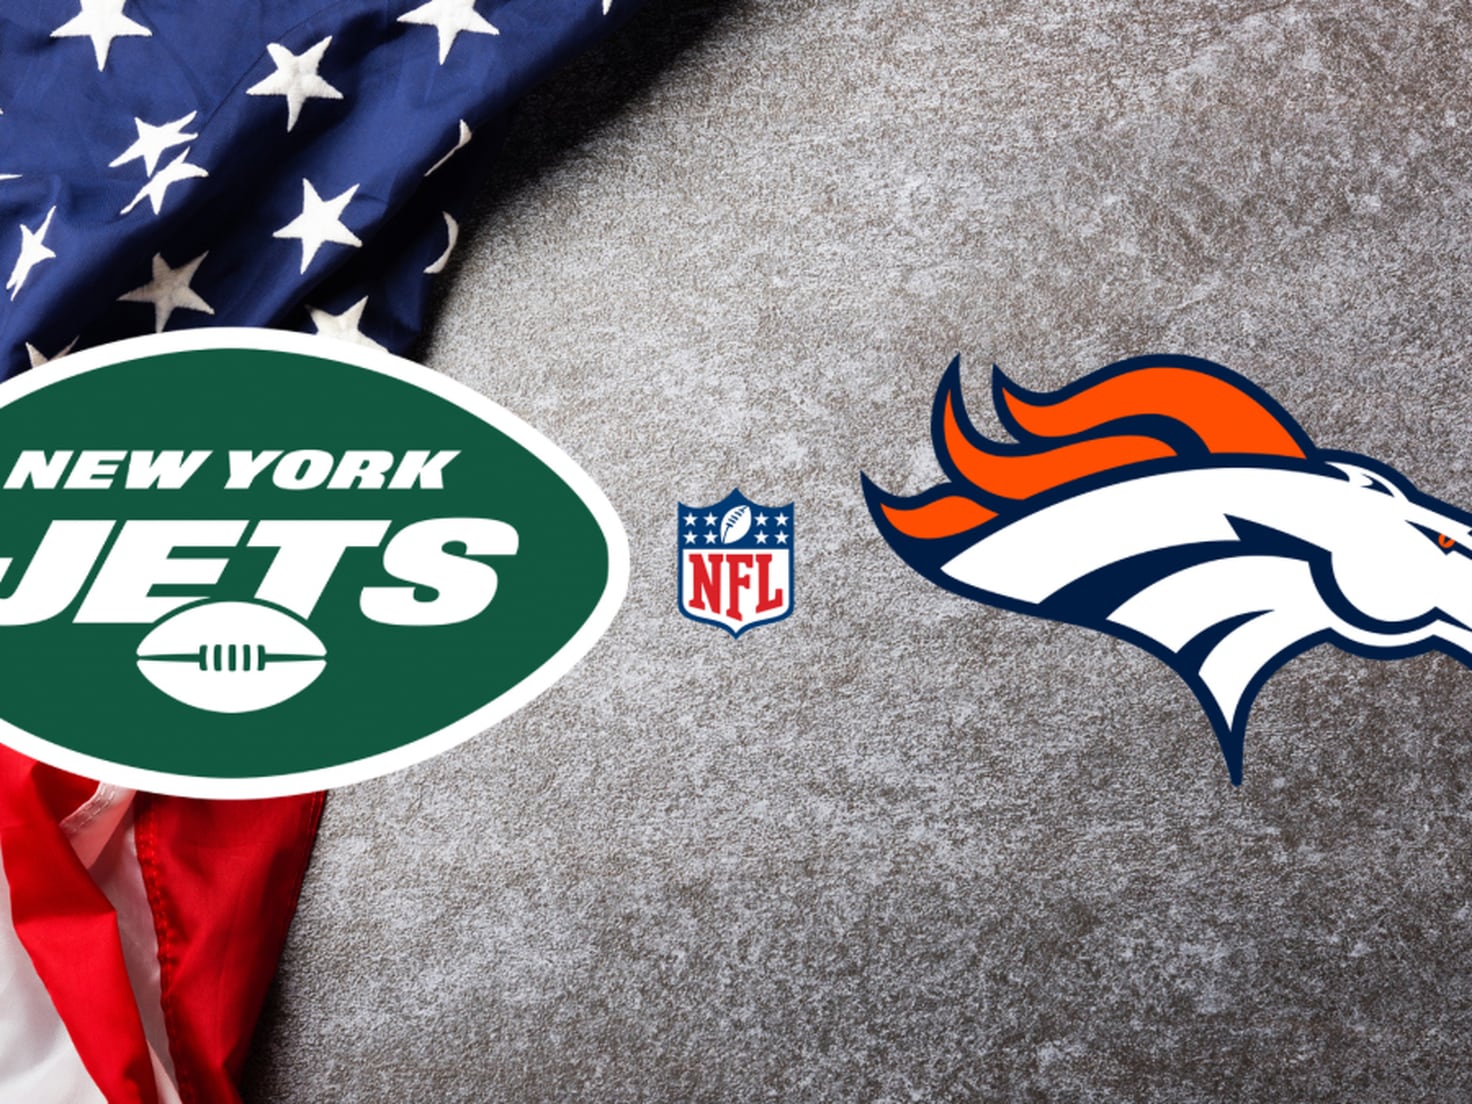 New York Jets vs. Kansas City Chiefs: How to watch NFL online, TV channel,  live stream info, start time 